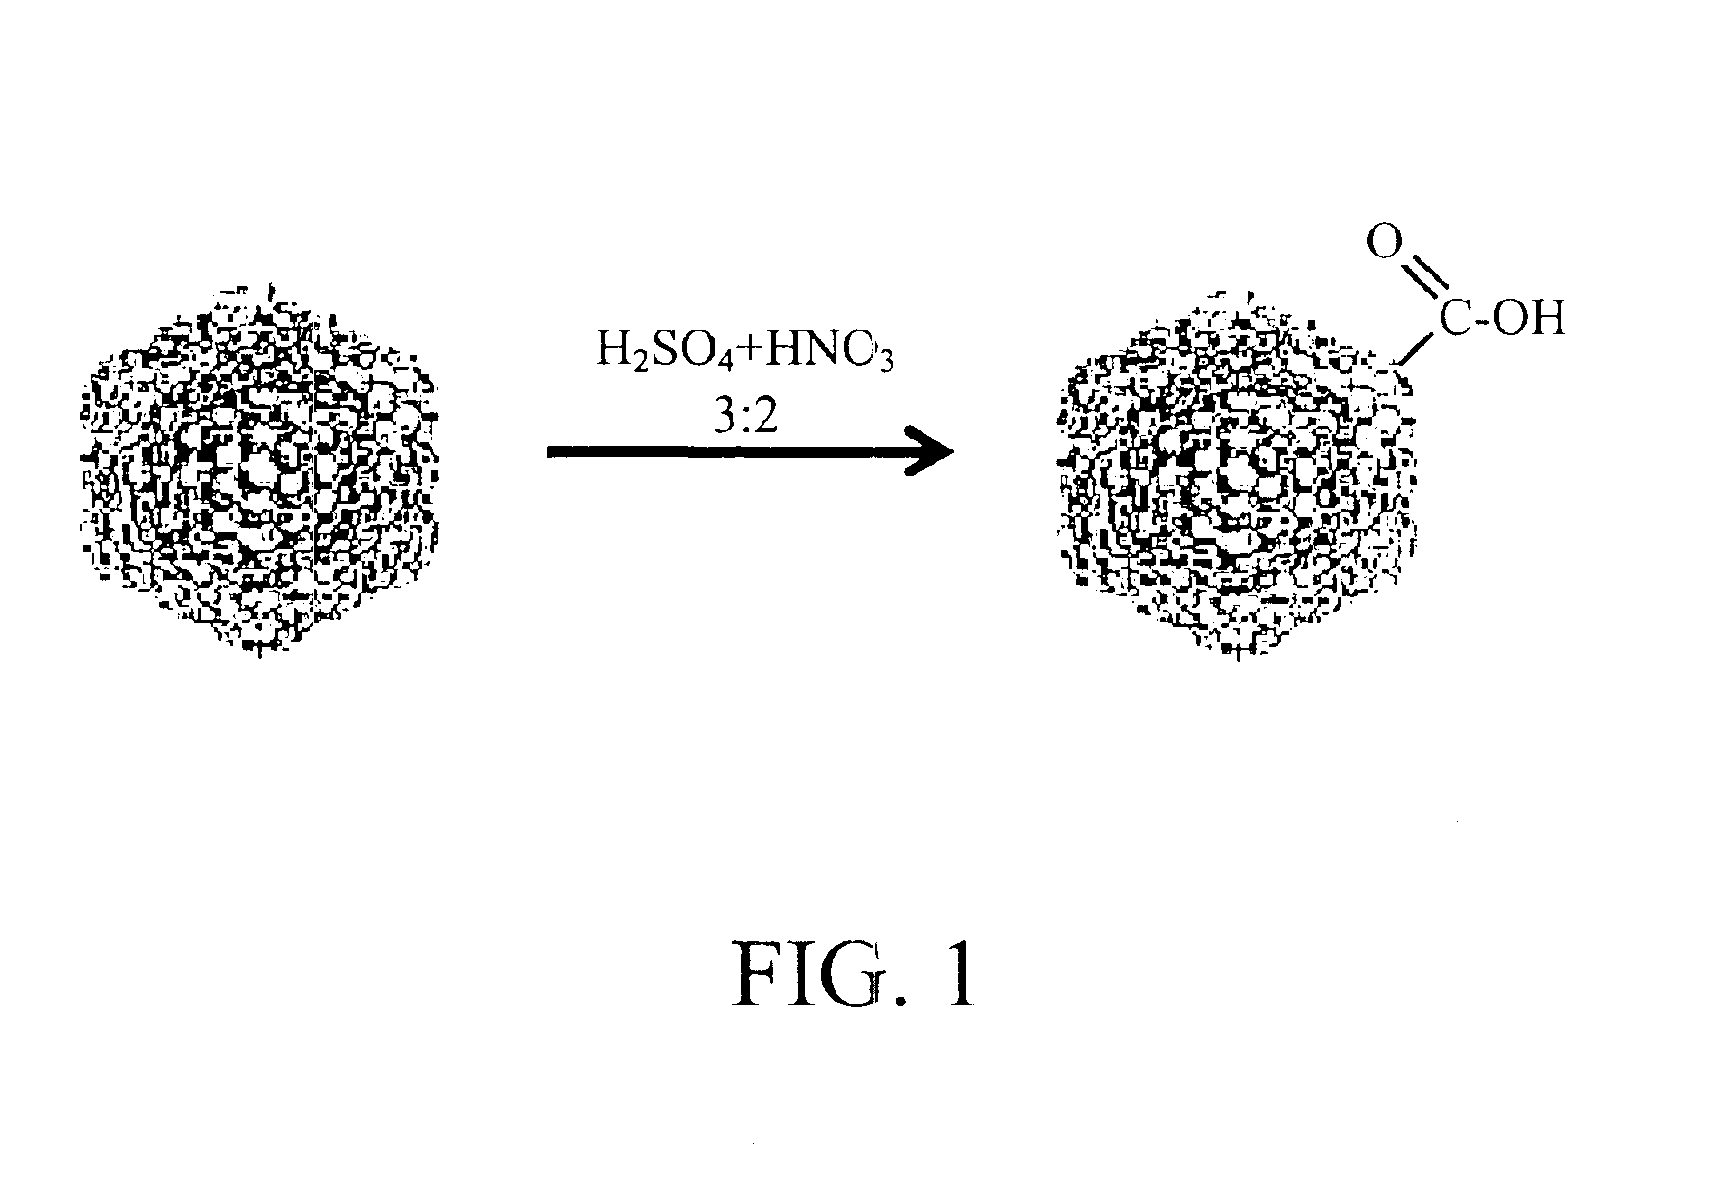 Carbon nanocapsule supported catalysts